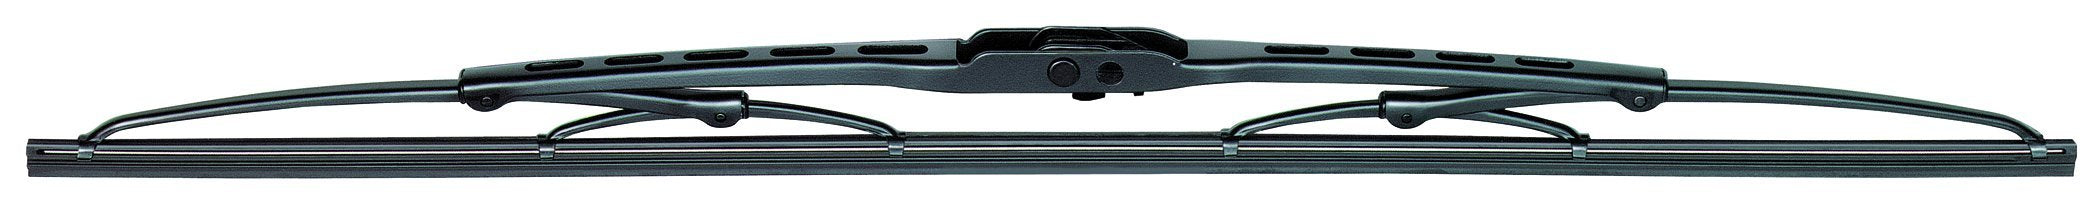 TRICO 20-1 Exact Fit 20 Inch  Conventional Replacement Wiper Blade